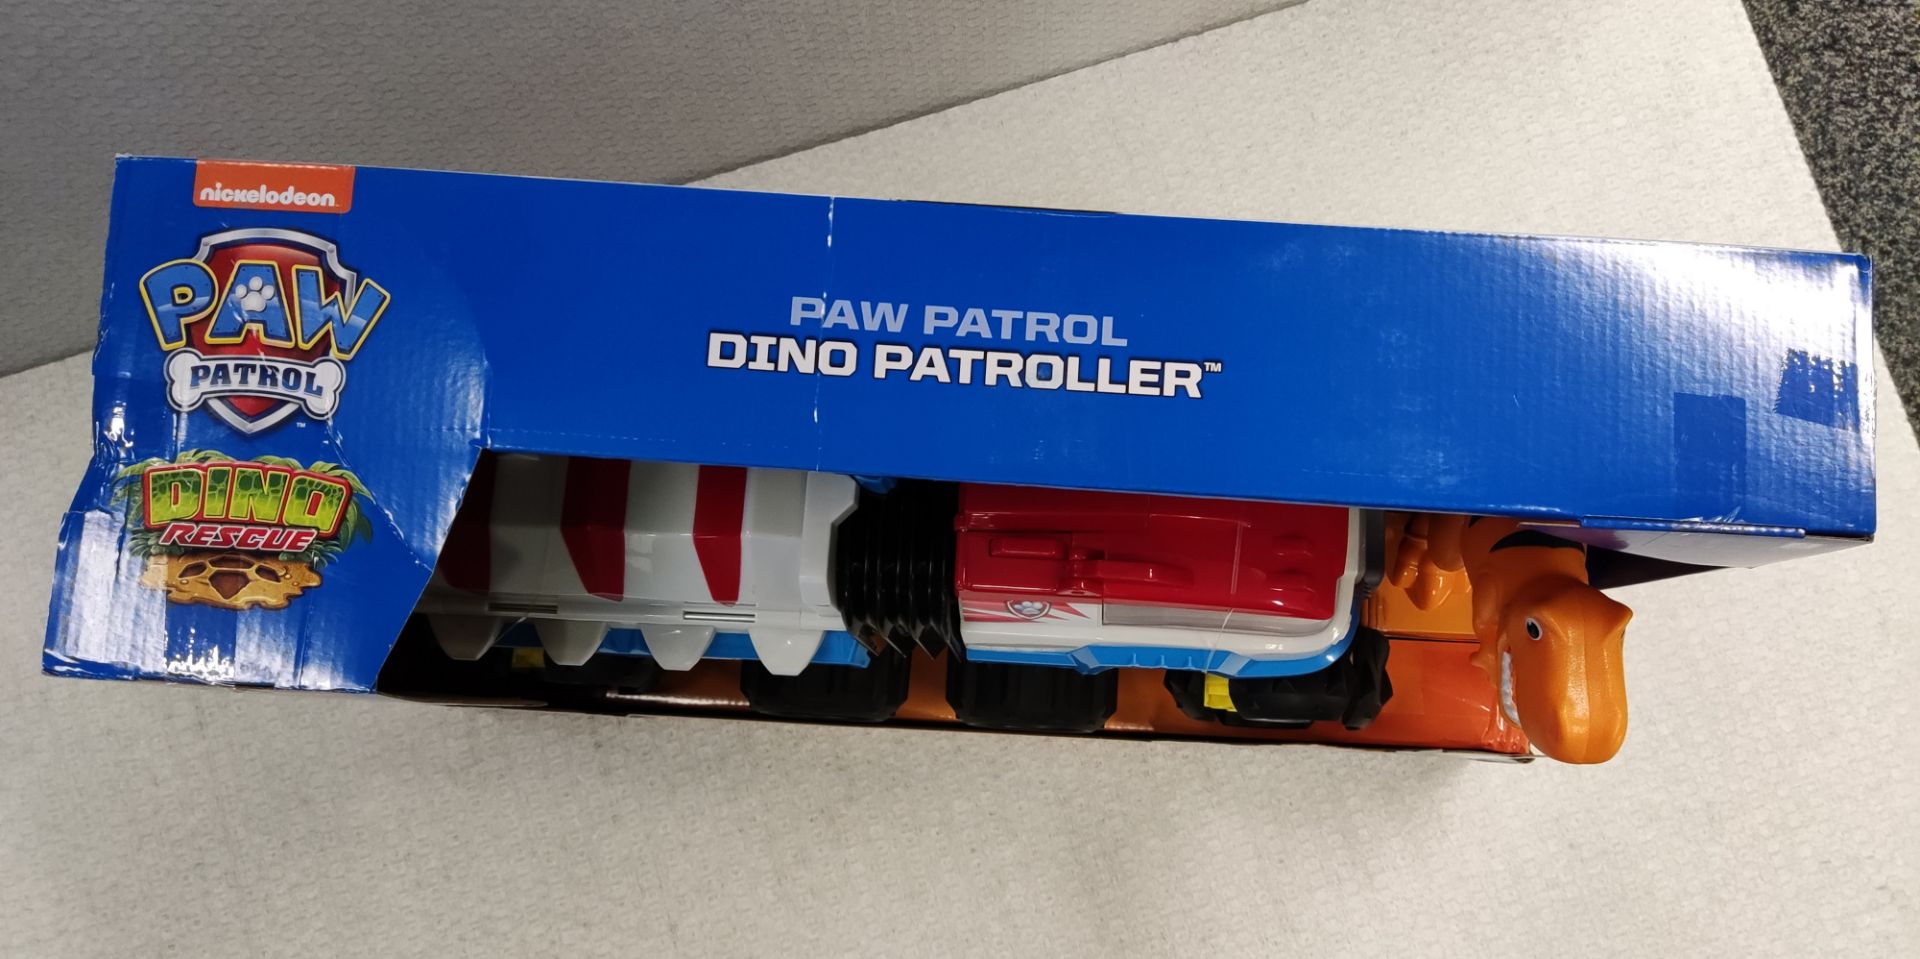 1 x Paw Patrol Dino Patroller Dino Rescue Vehicle - New/Boxed - Image 5 of 7